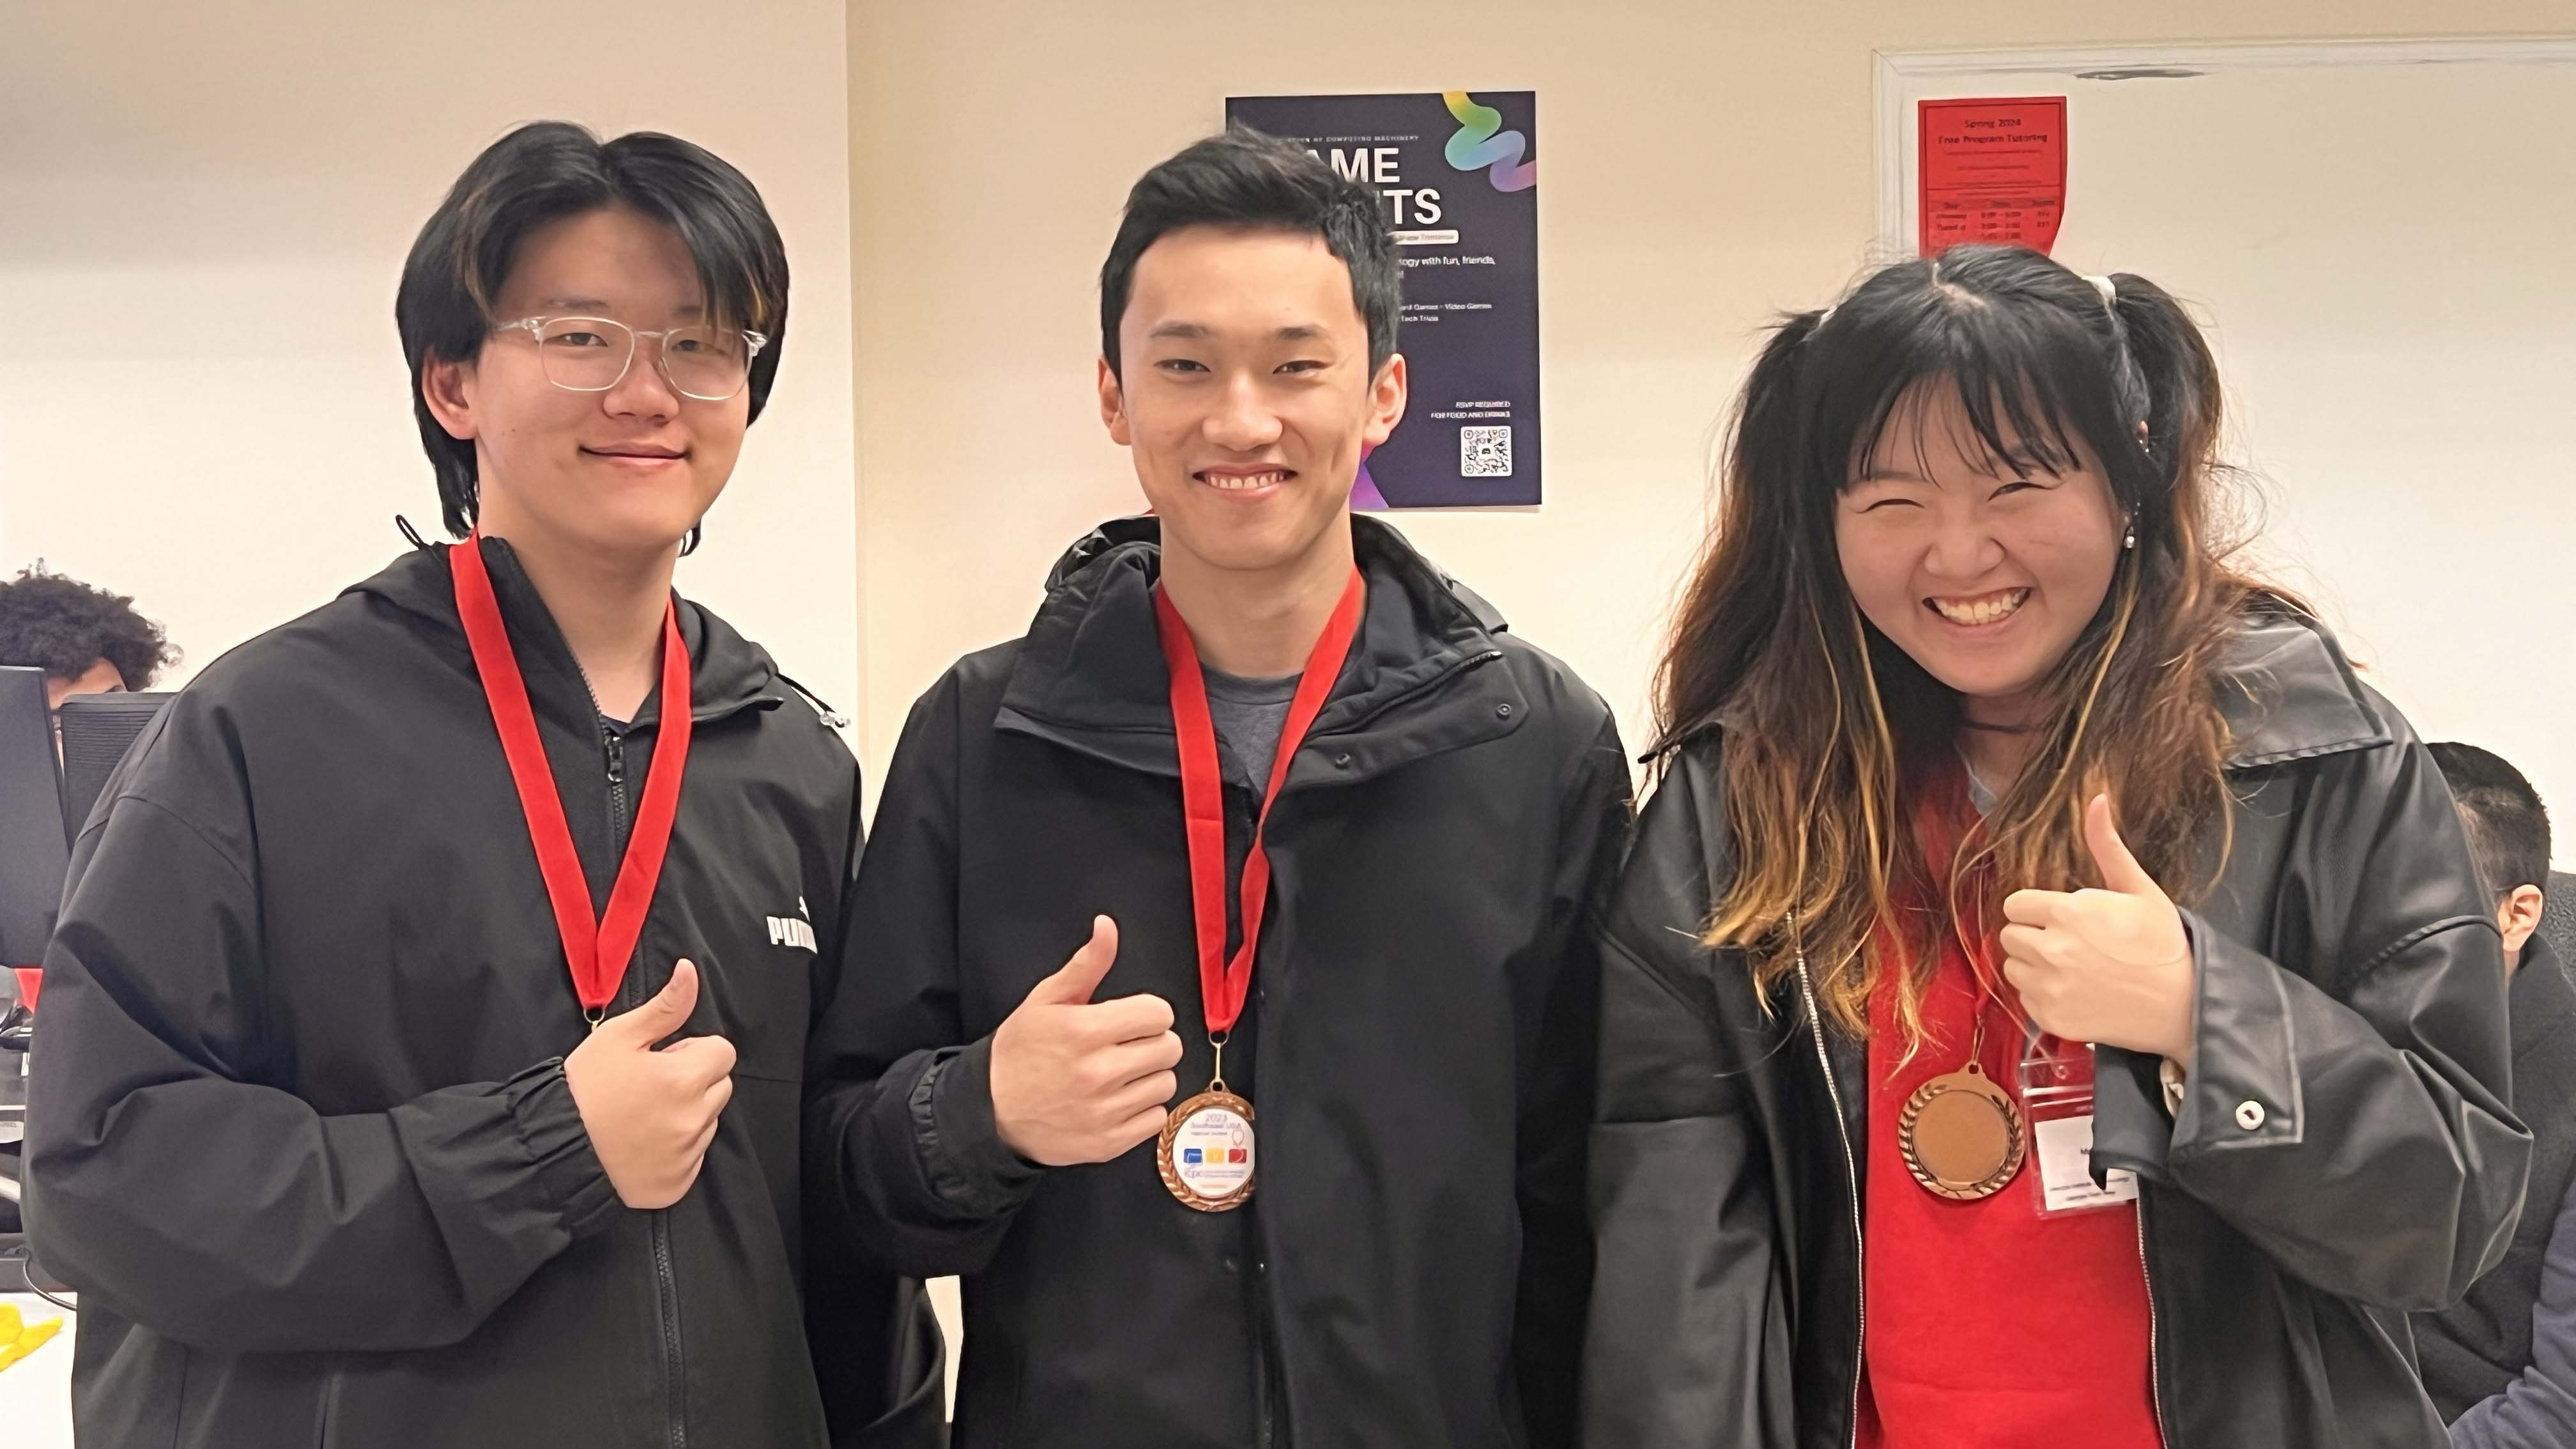 Raymond Bian, Jon Wang, and Marianna Cao competed as a team at the ICPC Regional Competition. Photos by Edward Chen